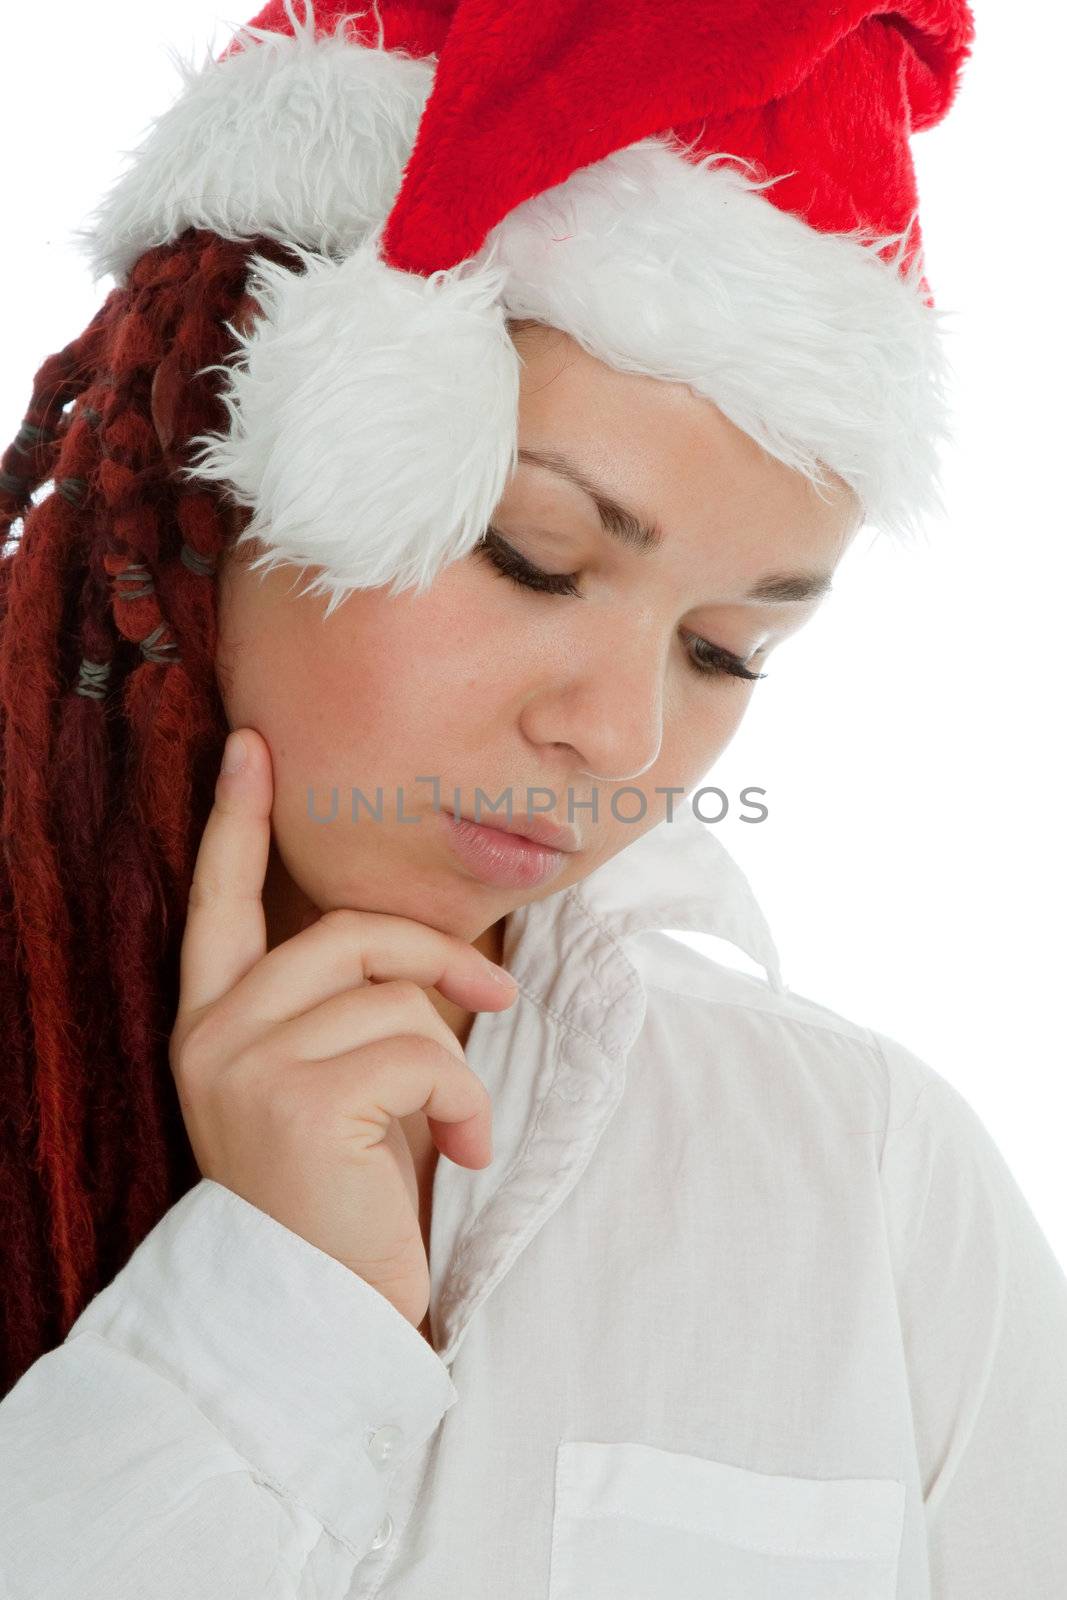 Portrait of young modern girl wearing Santa Claus hat isolated on white background.